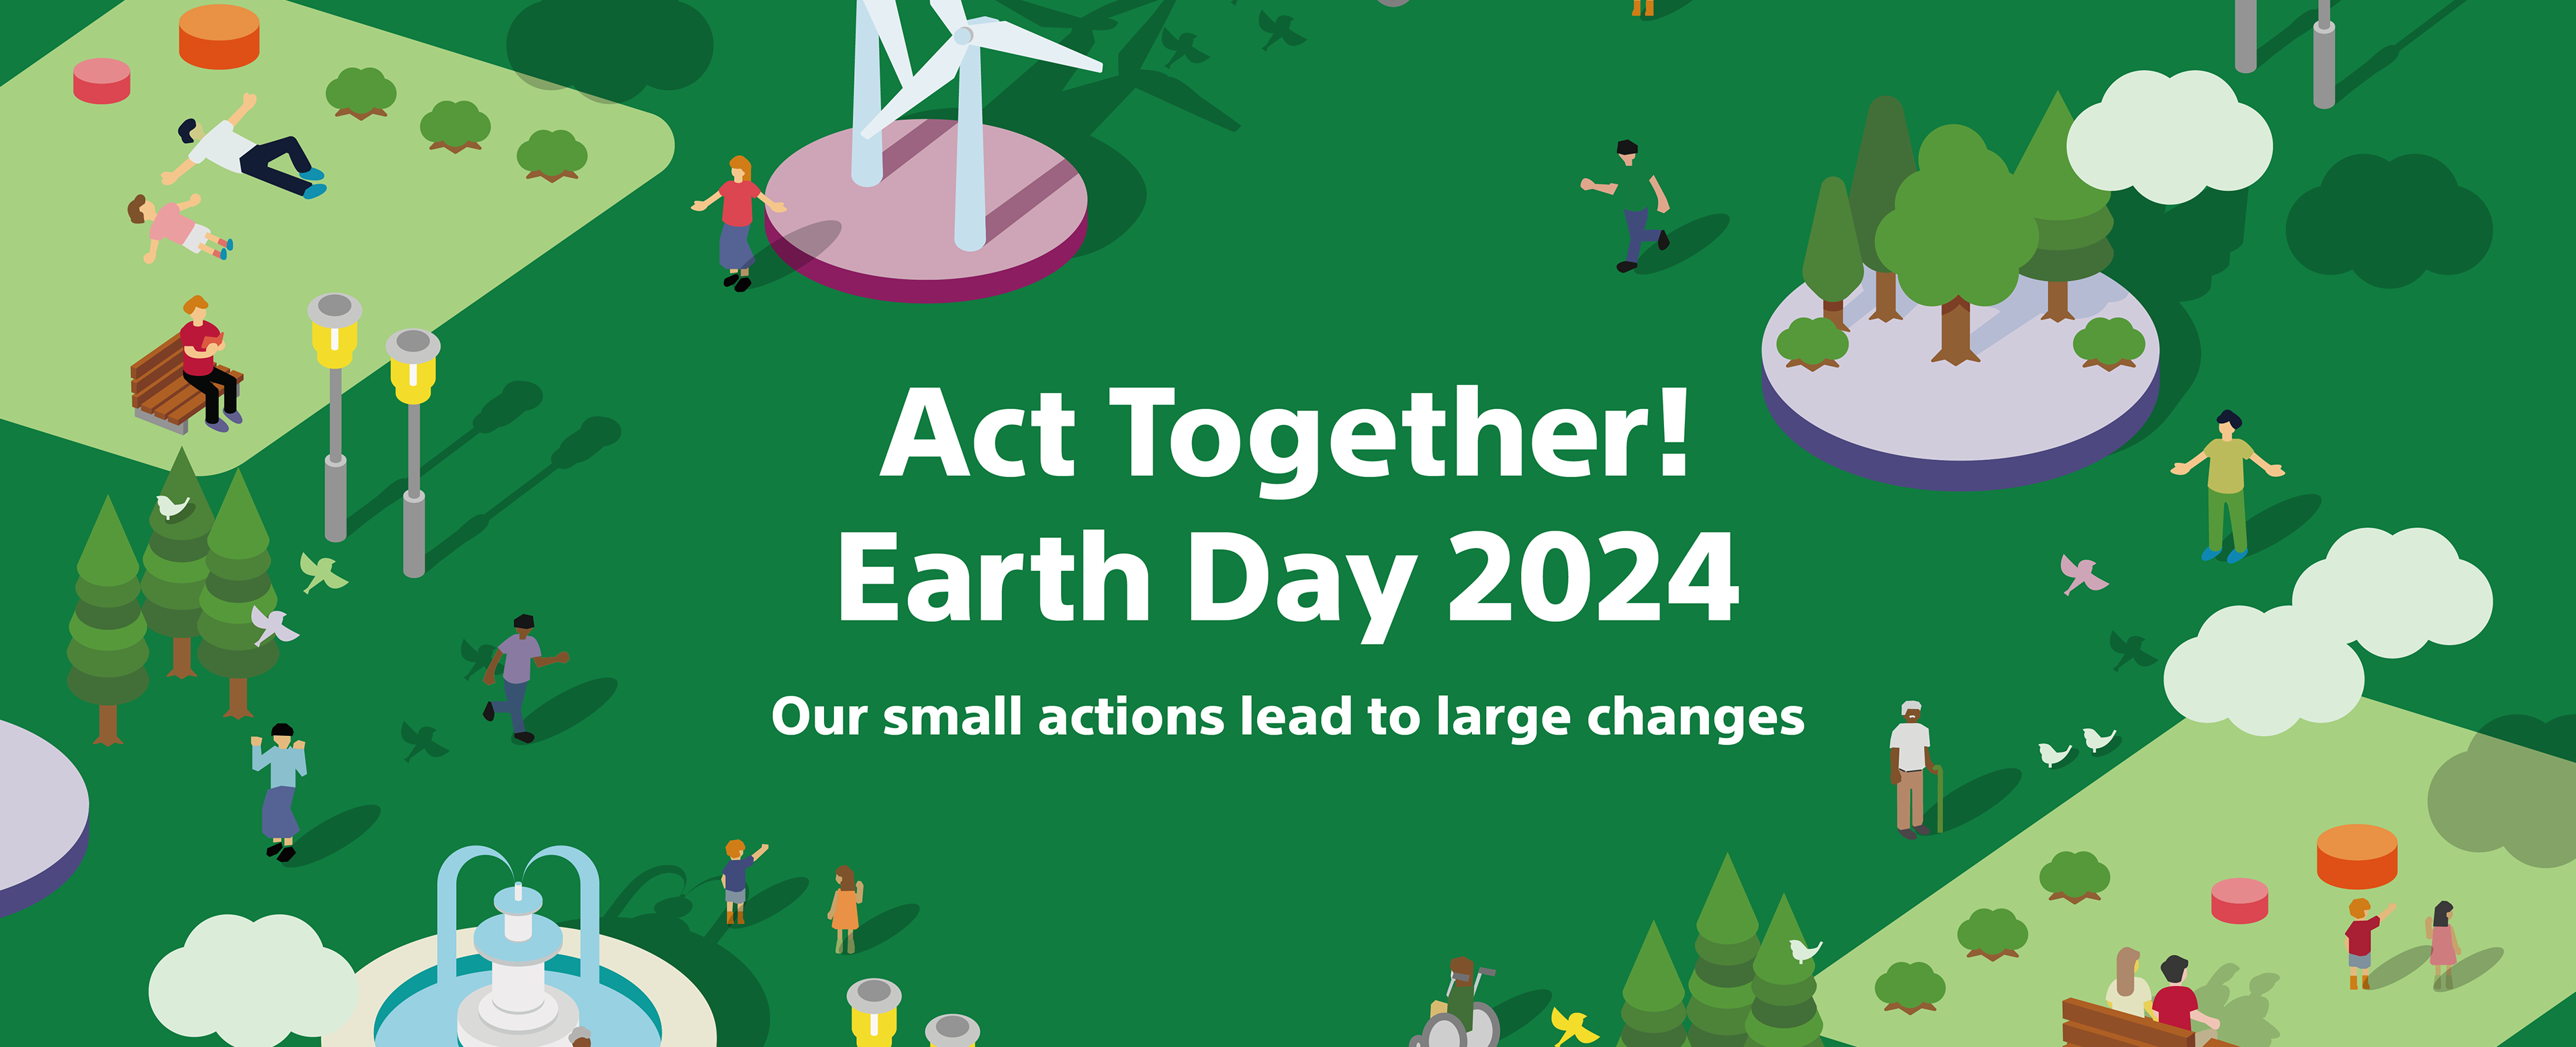 Illustration of the Earth and diverse people. The words "Act Together! Earth Day 2023-  our small actions lead to large changes." is written.